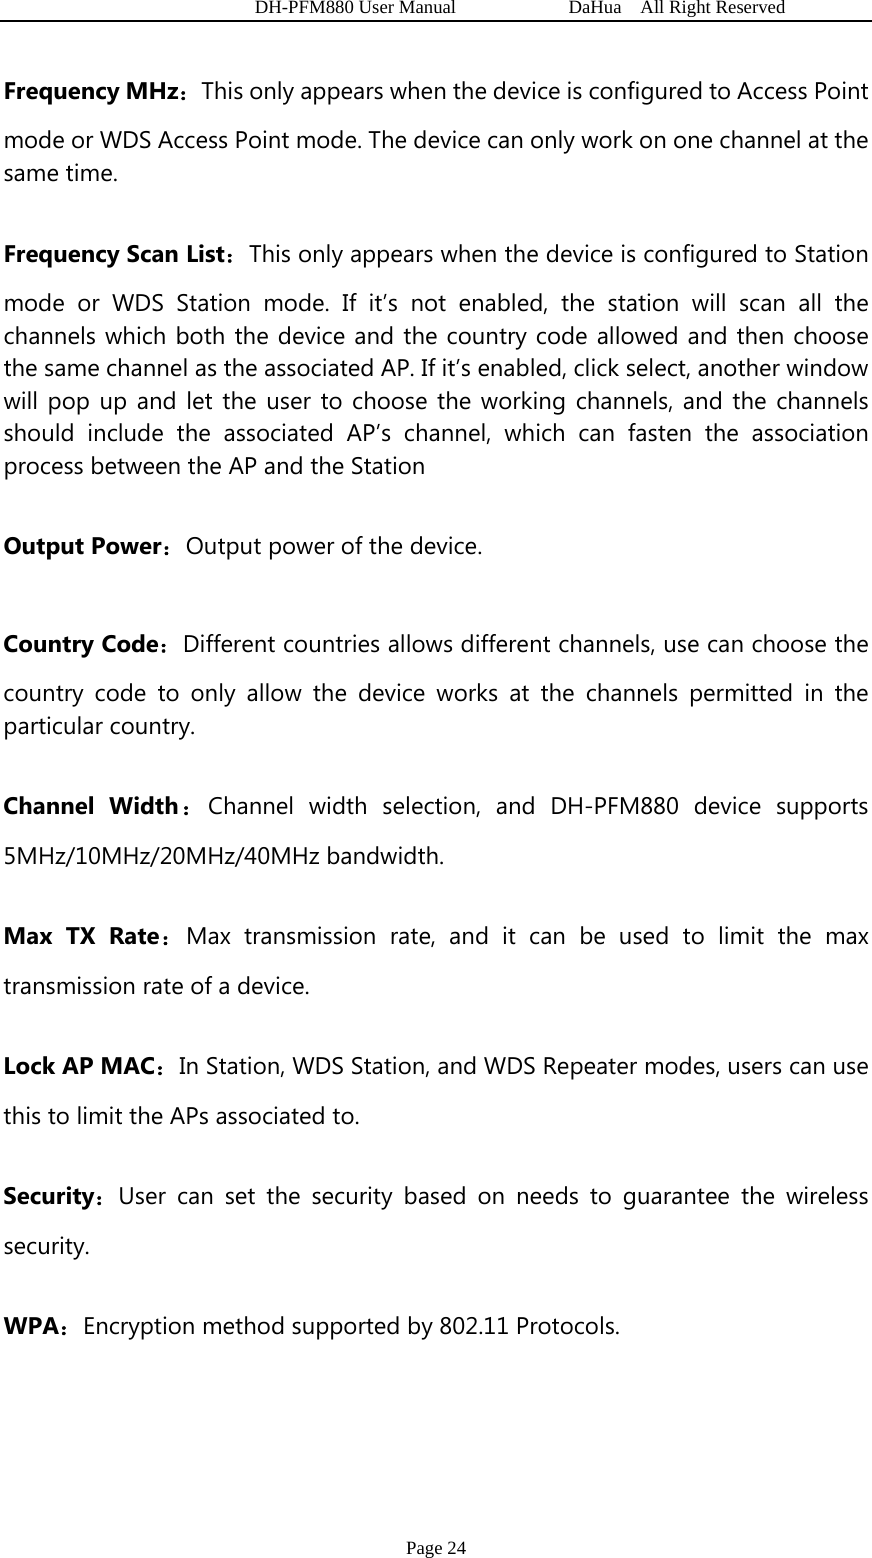   DH-PFM880 User Manual            DaHua  All Right Reserved Page 24 Frequency MHz：This only appears when the device is configured to Access Point mode or WDS Access Point mode. The device can only work on one channel at the same time. Frequency Scan List：This only appears when the device is configured to Station mode or WDS Station mode. If it’s not enabled, the station will scan all the channels which both the device and the country code allowed and then choose the same channel as the associated AP. If it’s enabled, click select, another window will pop up and let the user to choose the working channels, and the channels should include the associated AP’s channel, which can fasten the association process between the AP and the Station   Output Power：Output power of the device.   Country Code：Different countries allows different channels, use can choose the country code to only allow the device works at the channels permitted in the particular country. Channel Width：Channel width selection, and DH-PFM880 device supports 5MHz/10MHz/20MHz/40MHz bandwidth. Max TX Rate：Max transmission rate, and it can be used to limit the max transmission rate of a device. Lock AP MAC：In Station, WDS Station, and WDS Repeater modes, users can use this to limit the APs associated to. Security：User can set the security based on needs to guarantee the wireless security. WPA：Encryption method supported by 802.11 Protocols.  